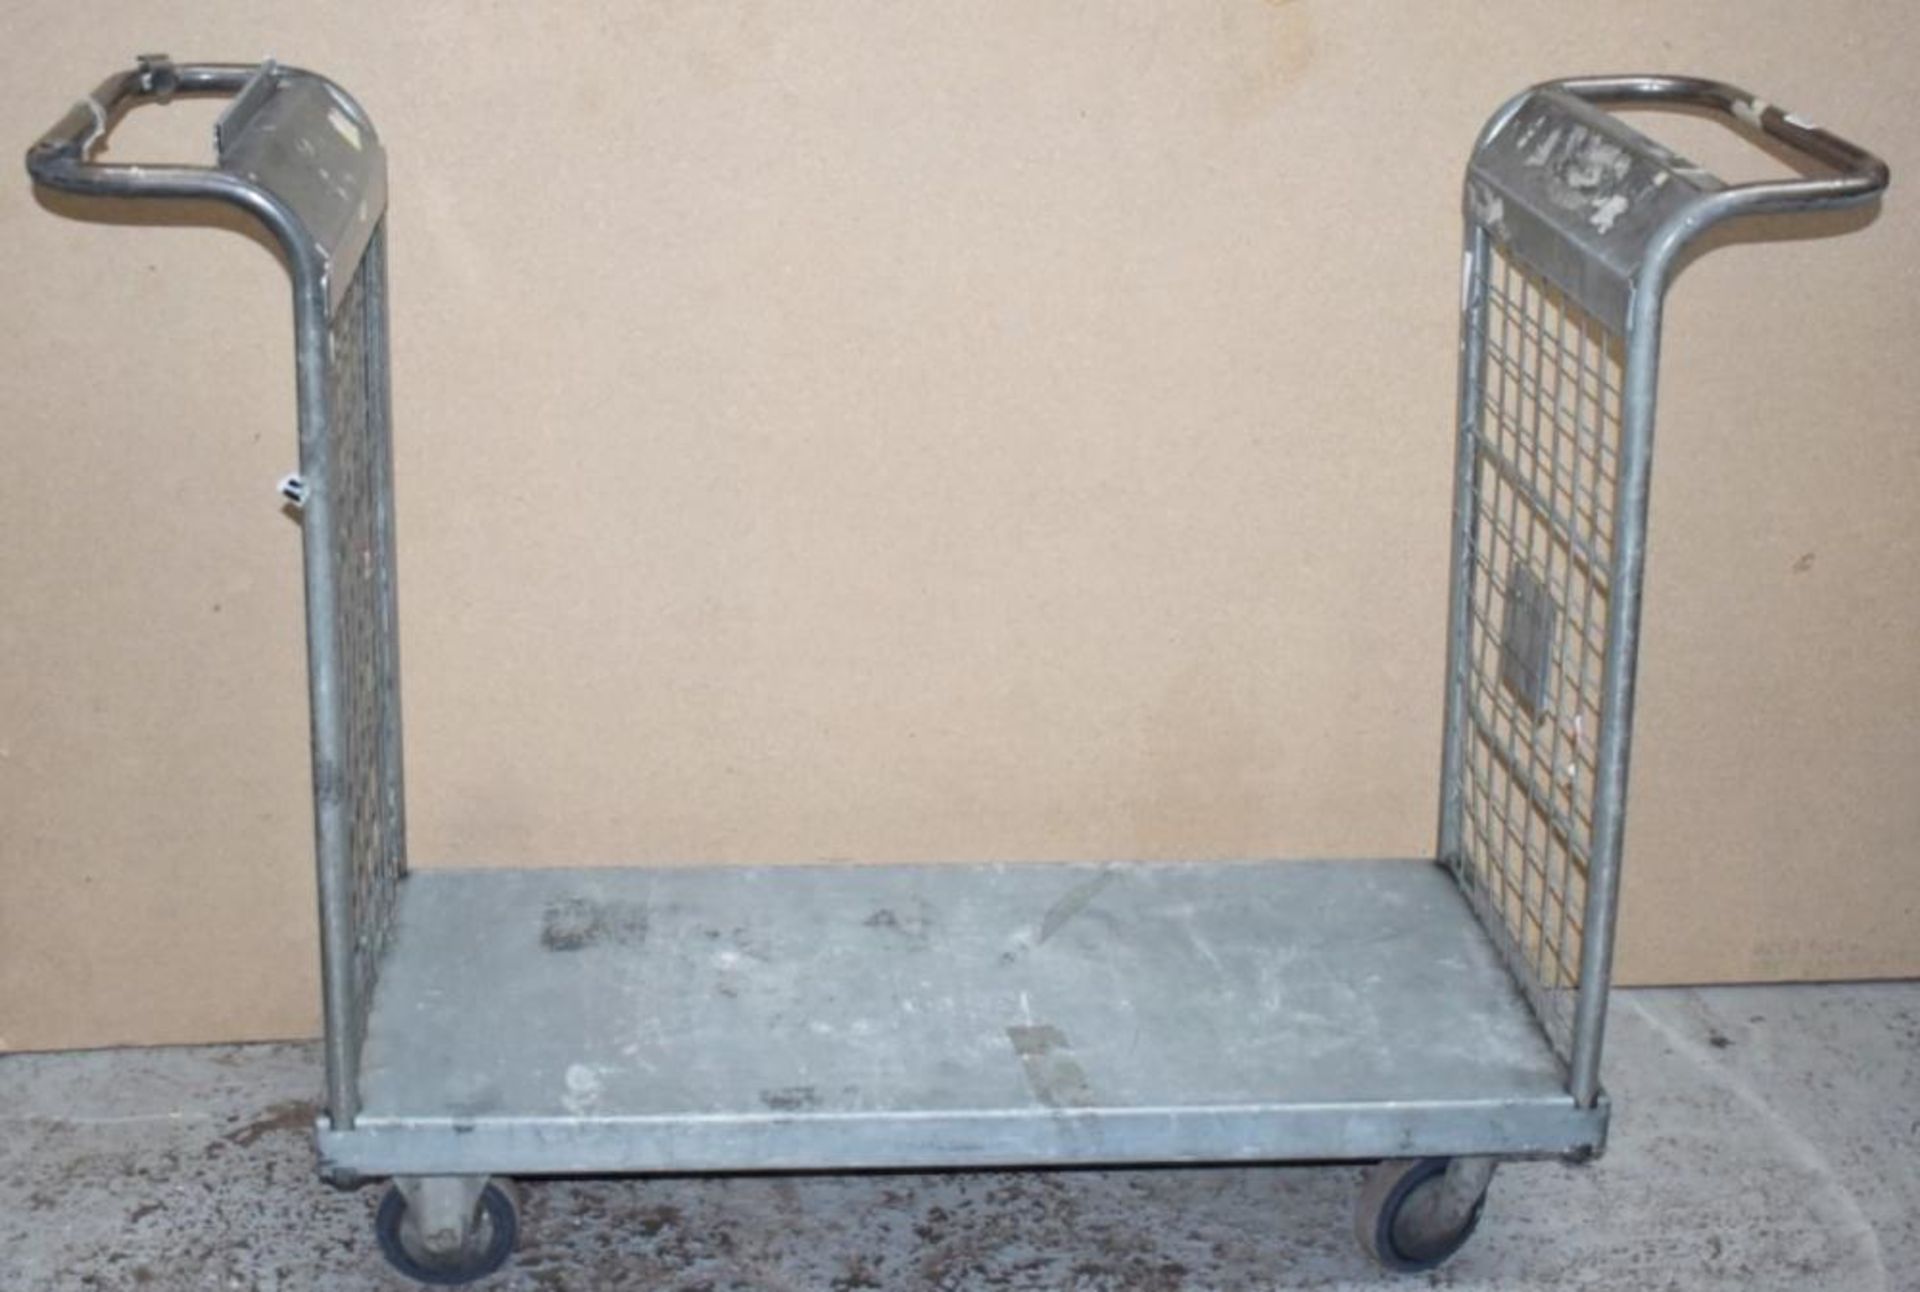 1 x Platform Trolley With Heavy Duty Wheels, Two Handles and Waste Bag Holder - Features a 100 x 46 - Image 4 of 6